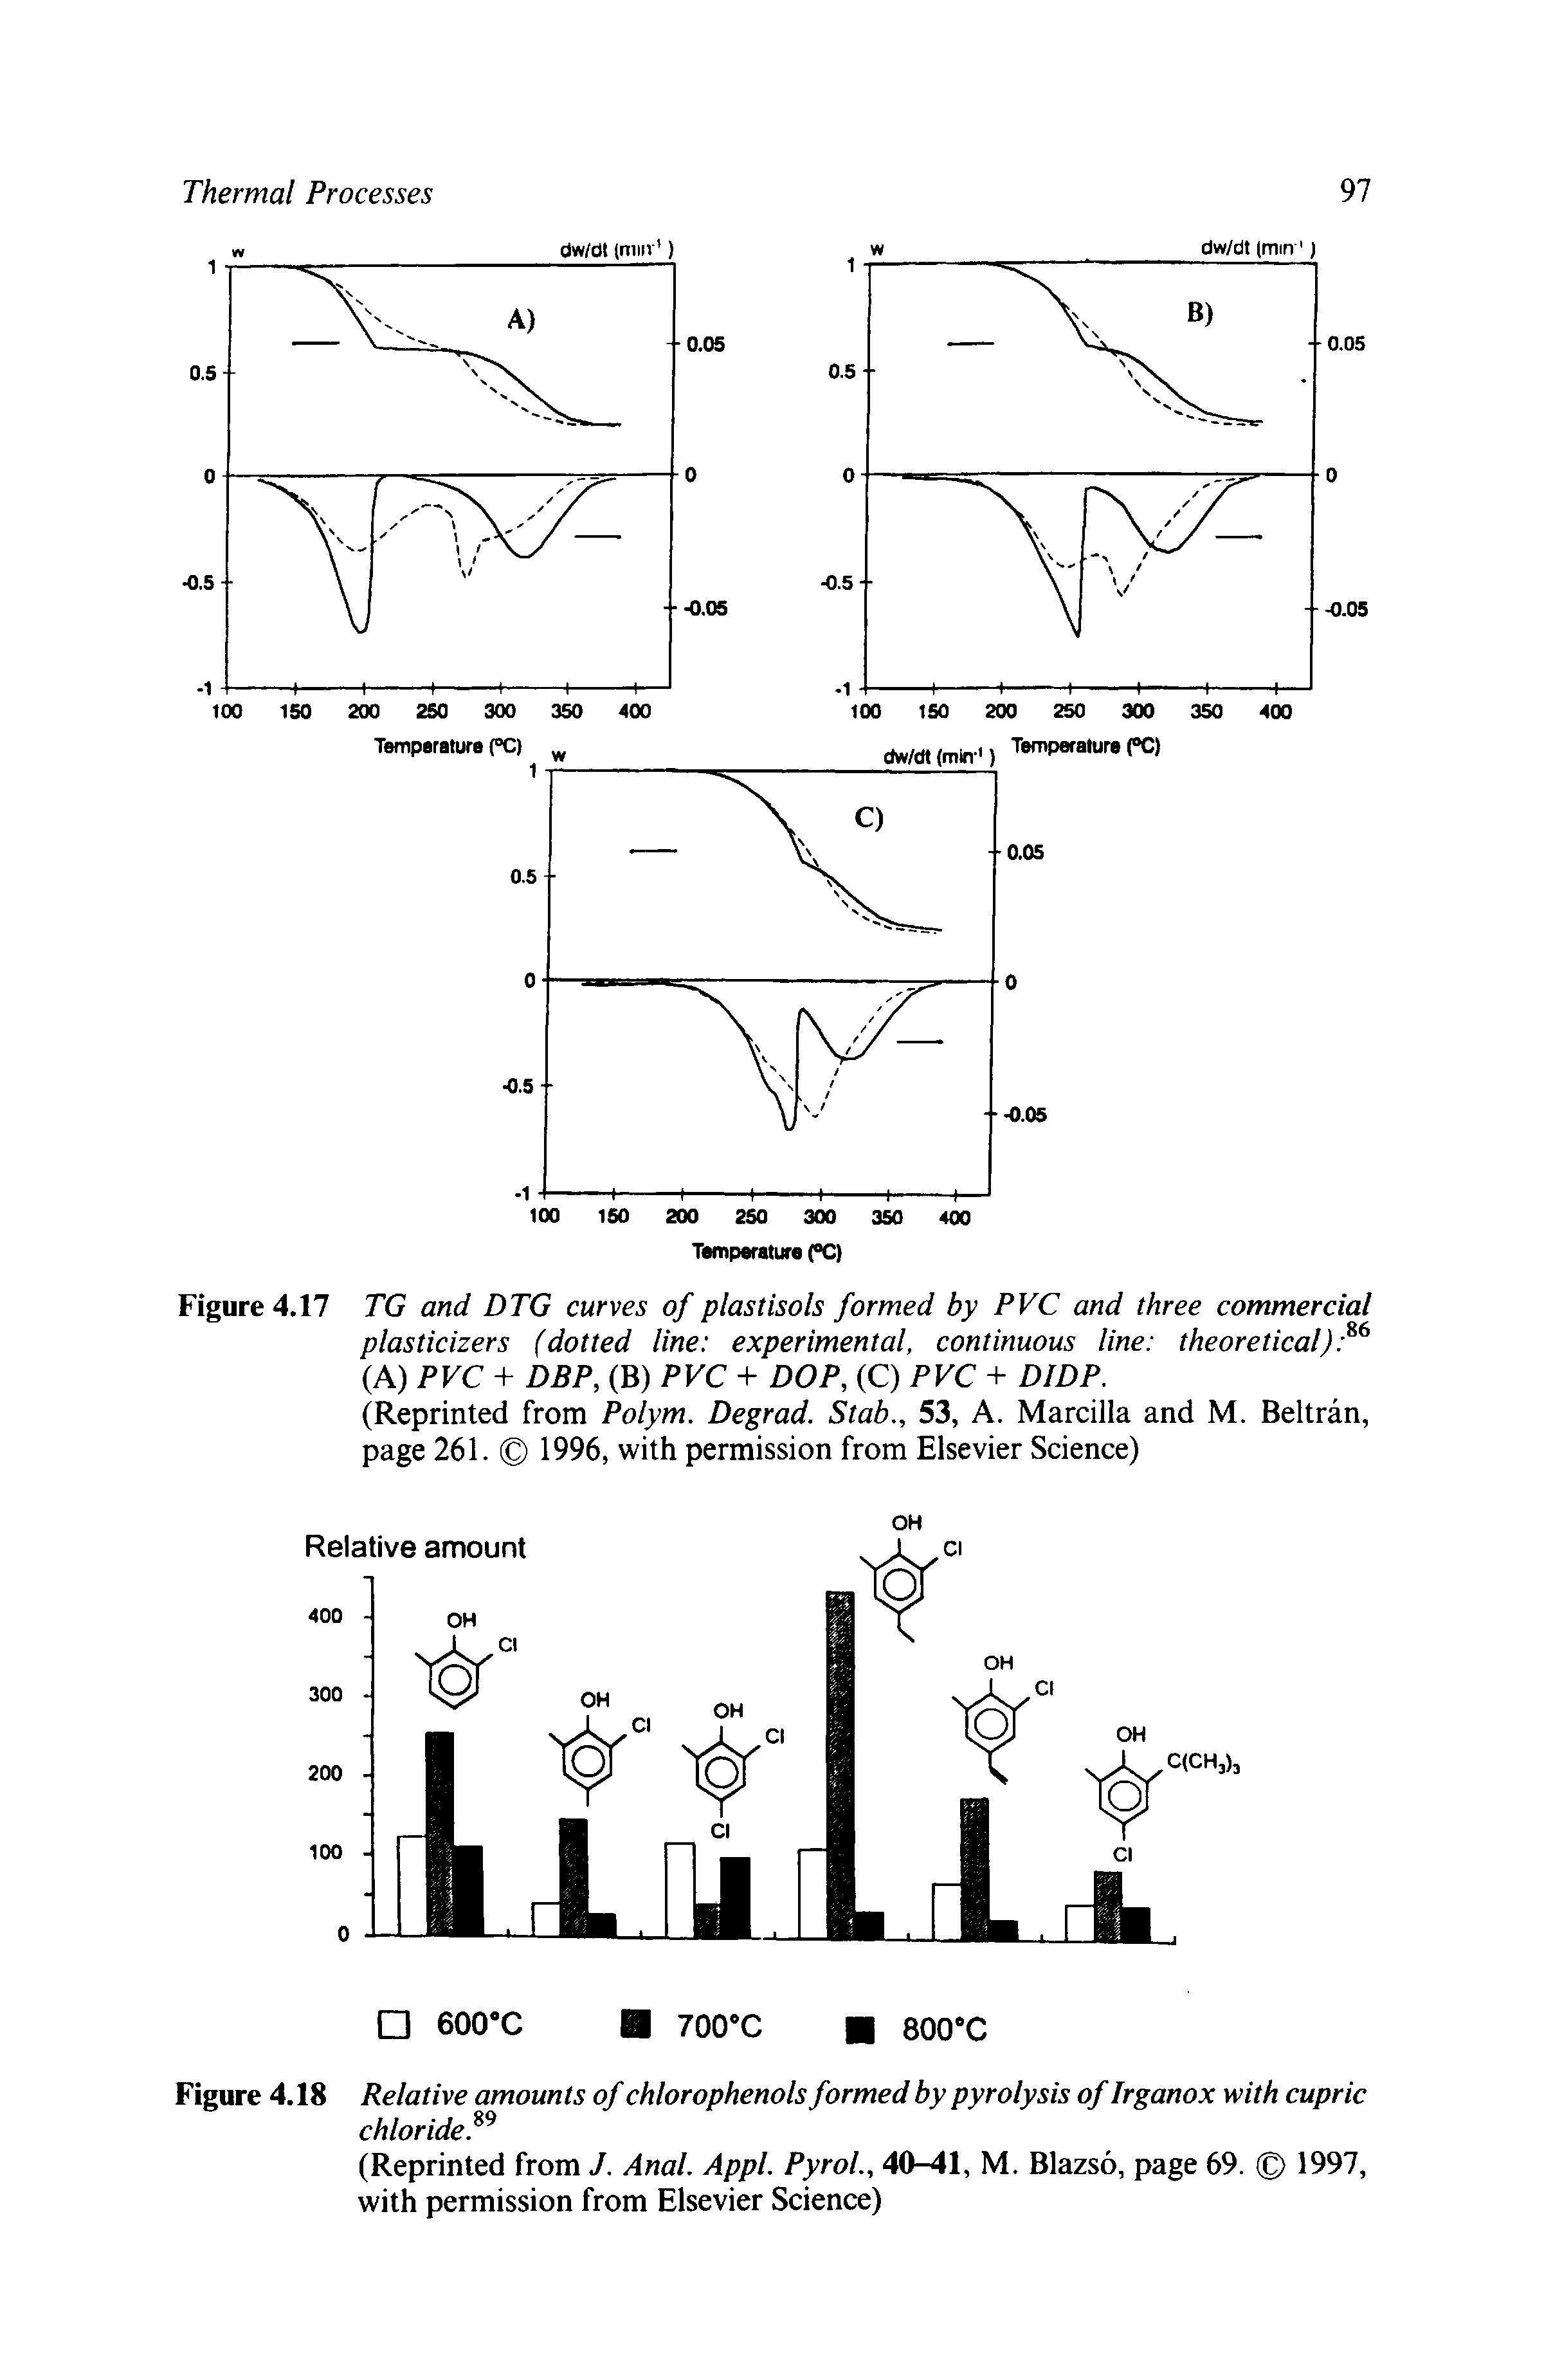 Figure 4.17 TG and DTG curves of plastisols formed by PVC and three commercial plasticizers (dotted line experimental, continuous line theoretical) 6 (A) PVC + DBP, (B) PVC + DOP, (C) PVC + DIDP.